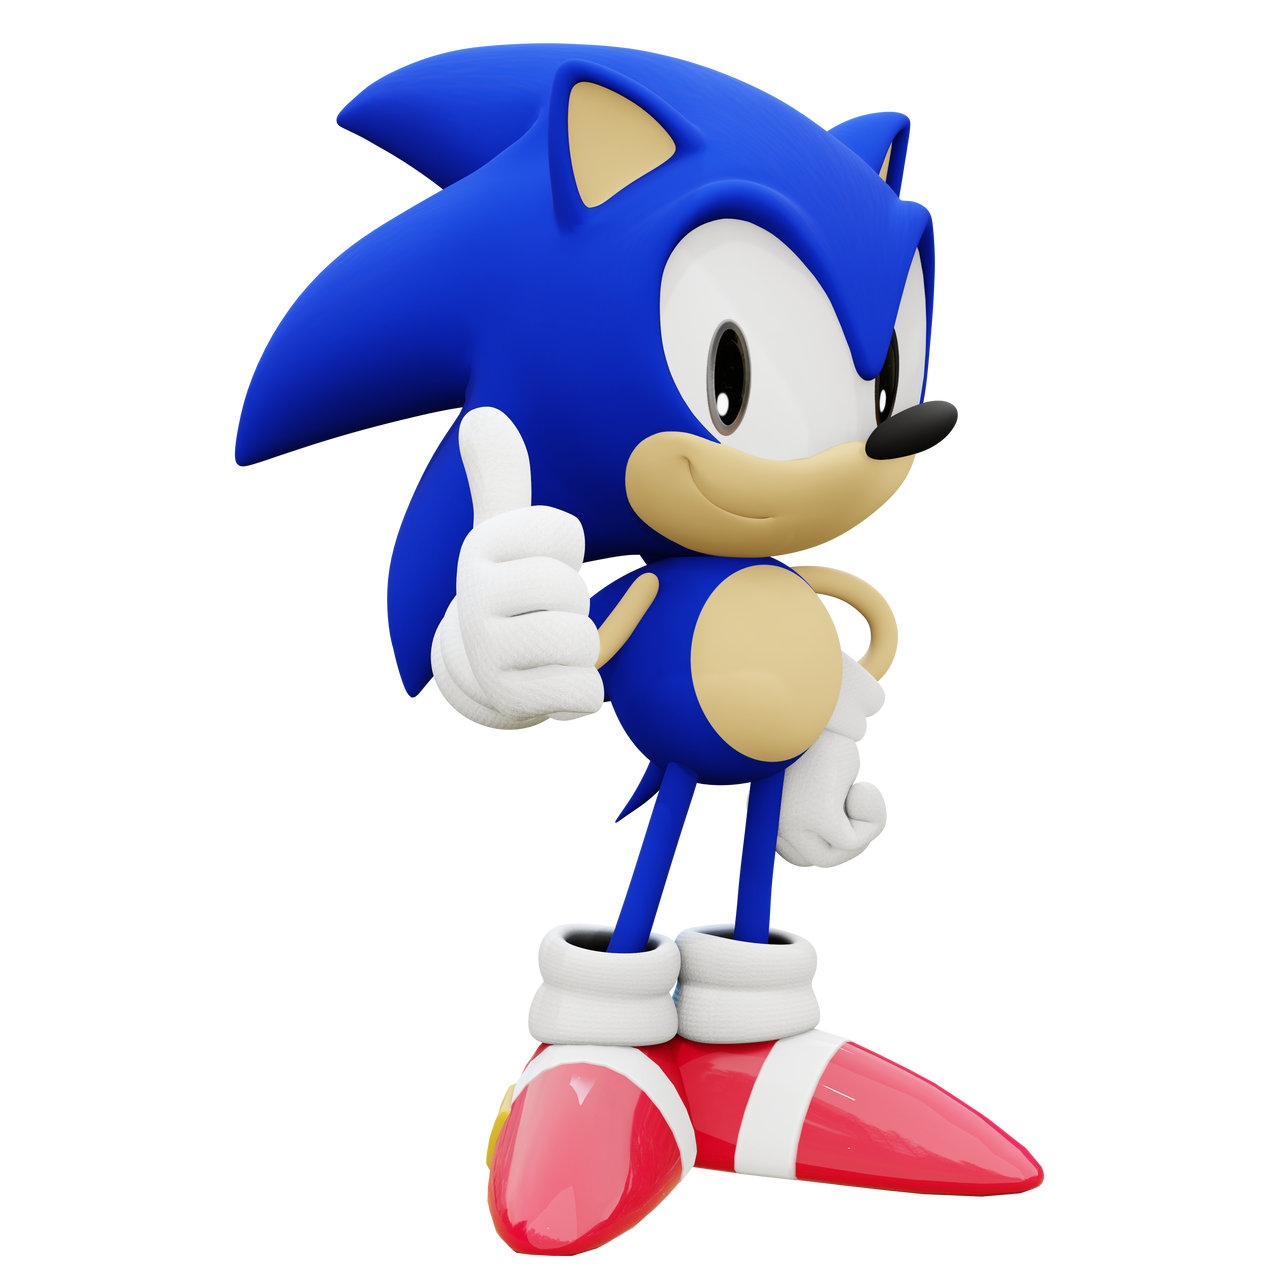 Classic Tails - Classic Render by bandicootbrawl96 on DeviantArt